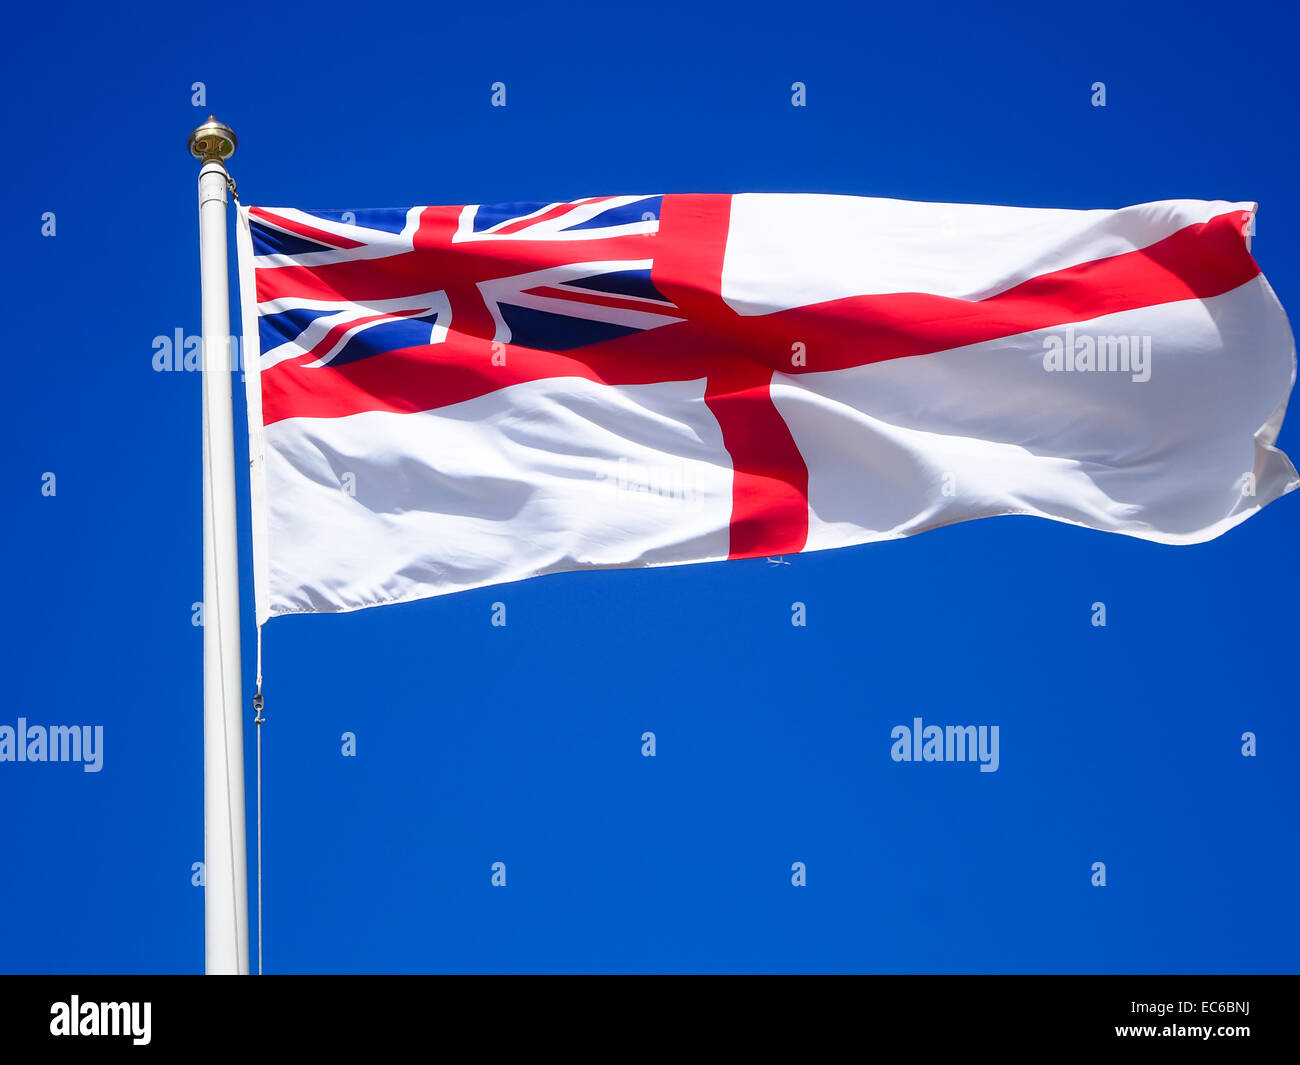 A White ensign flying at the top of a flag pole against a blue sky Stock Photo